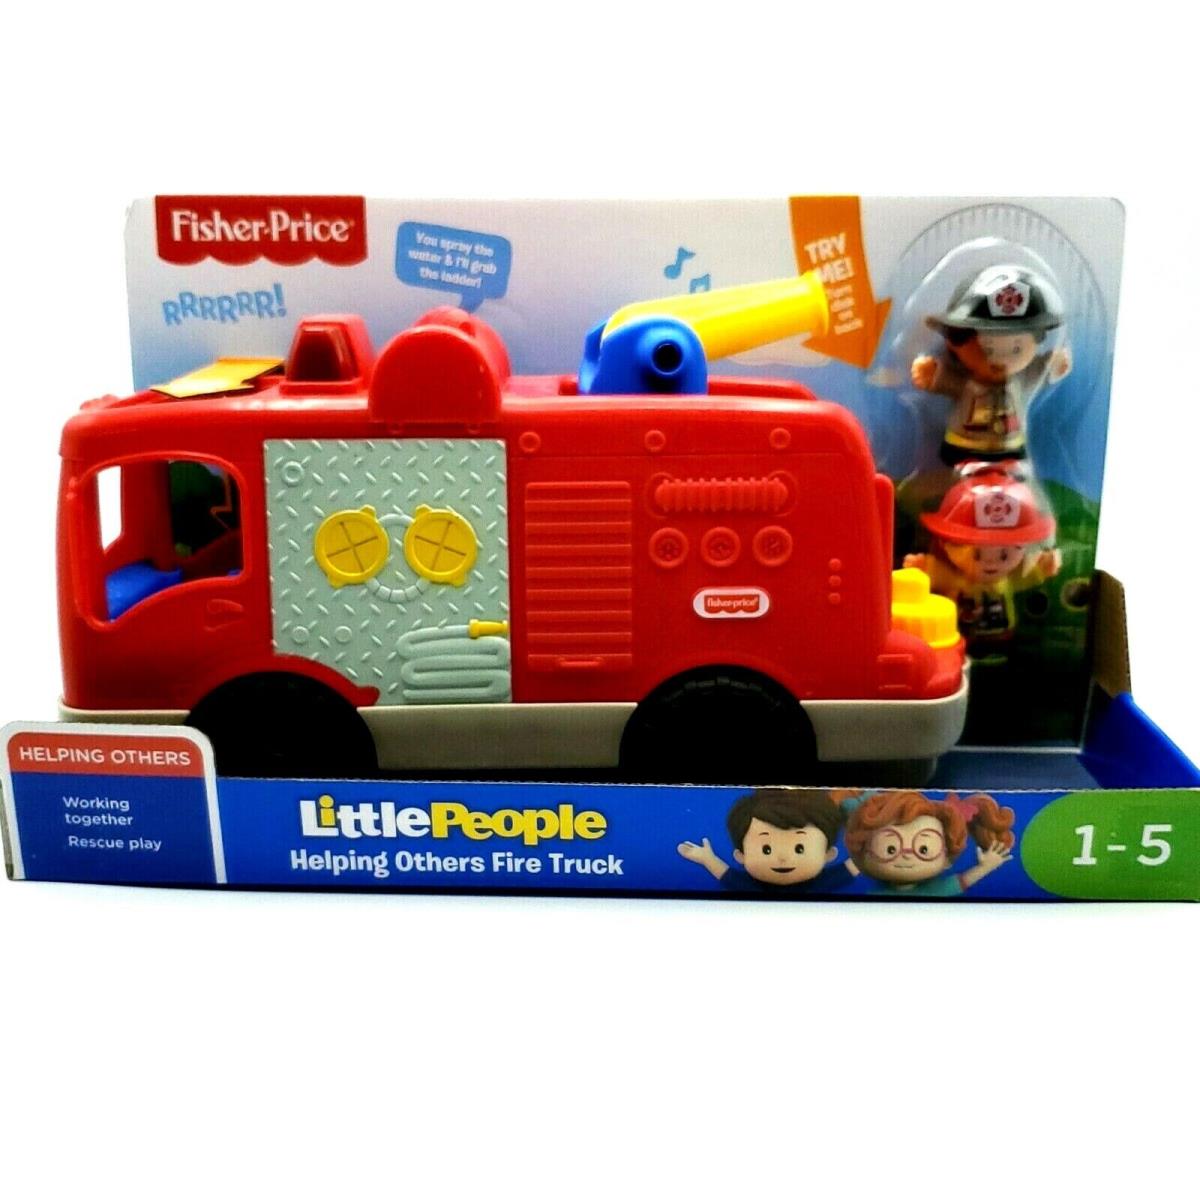 Fisher Price Little People Fire Engine Truck Toy Light Up Singing Ages 1-5